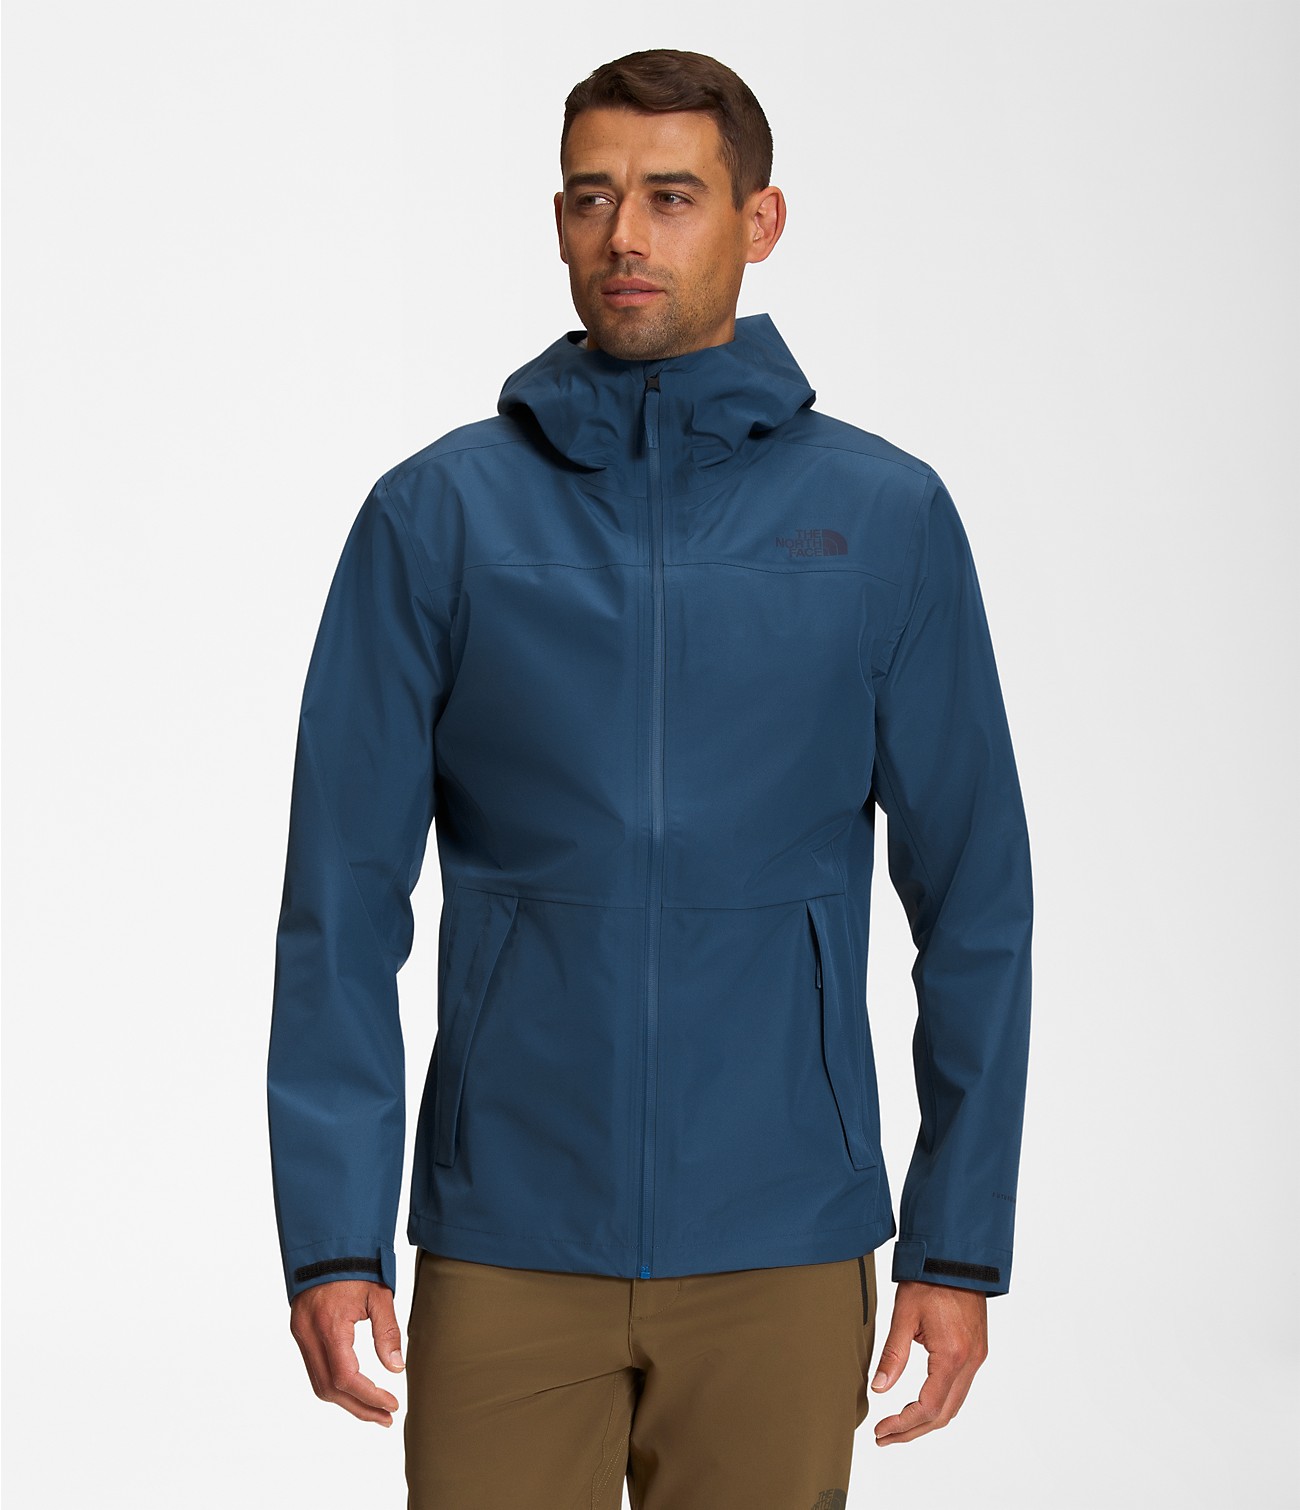 Unlock Wilderness' choice in the KÜHL Vs North Face comparison, the Dryzzle FUTURELIGHT™ Jacket by The North Face